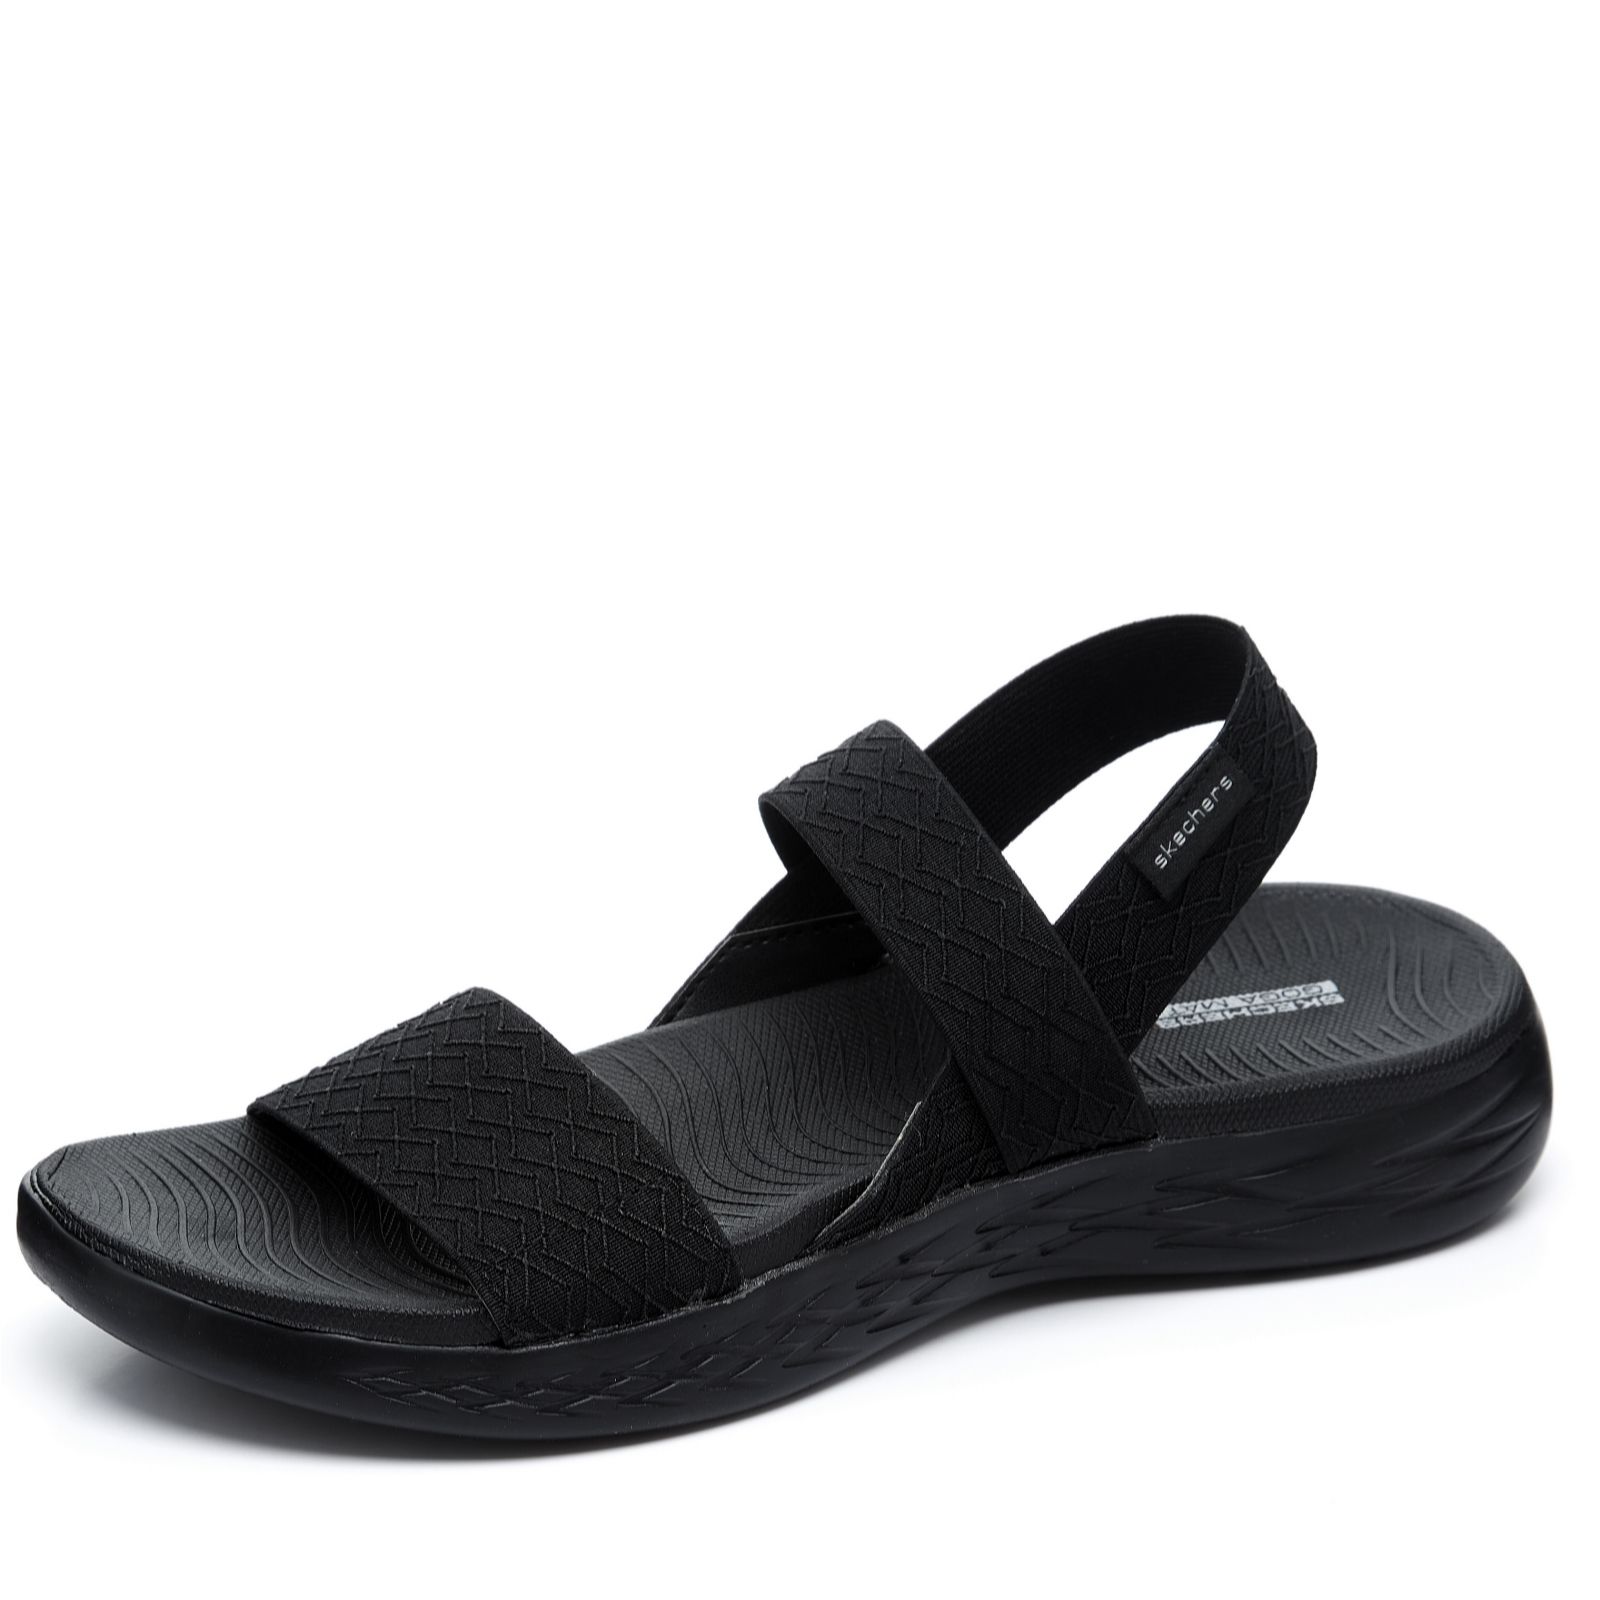 skechers with elastic straps